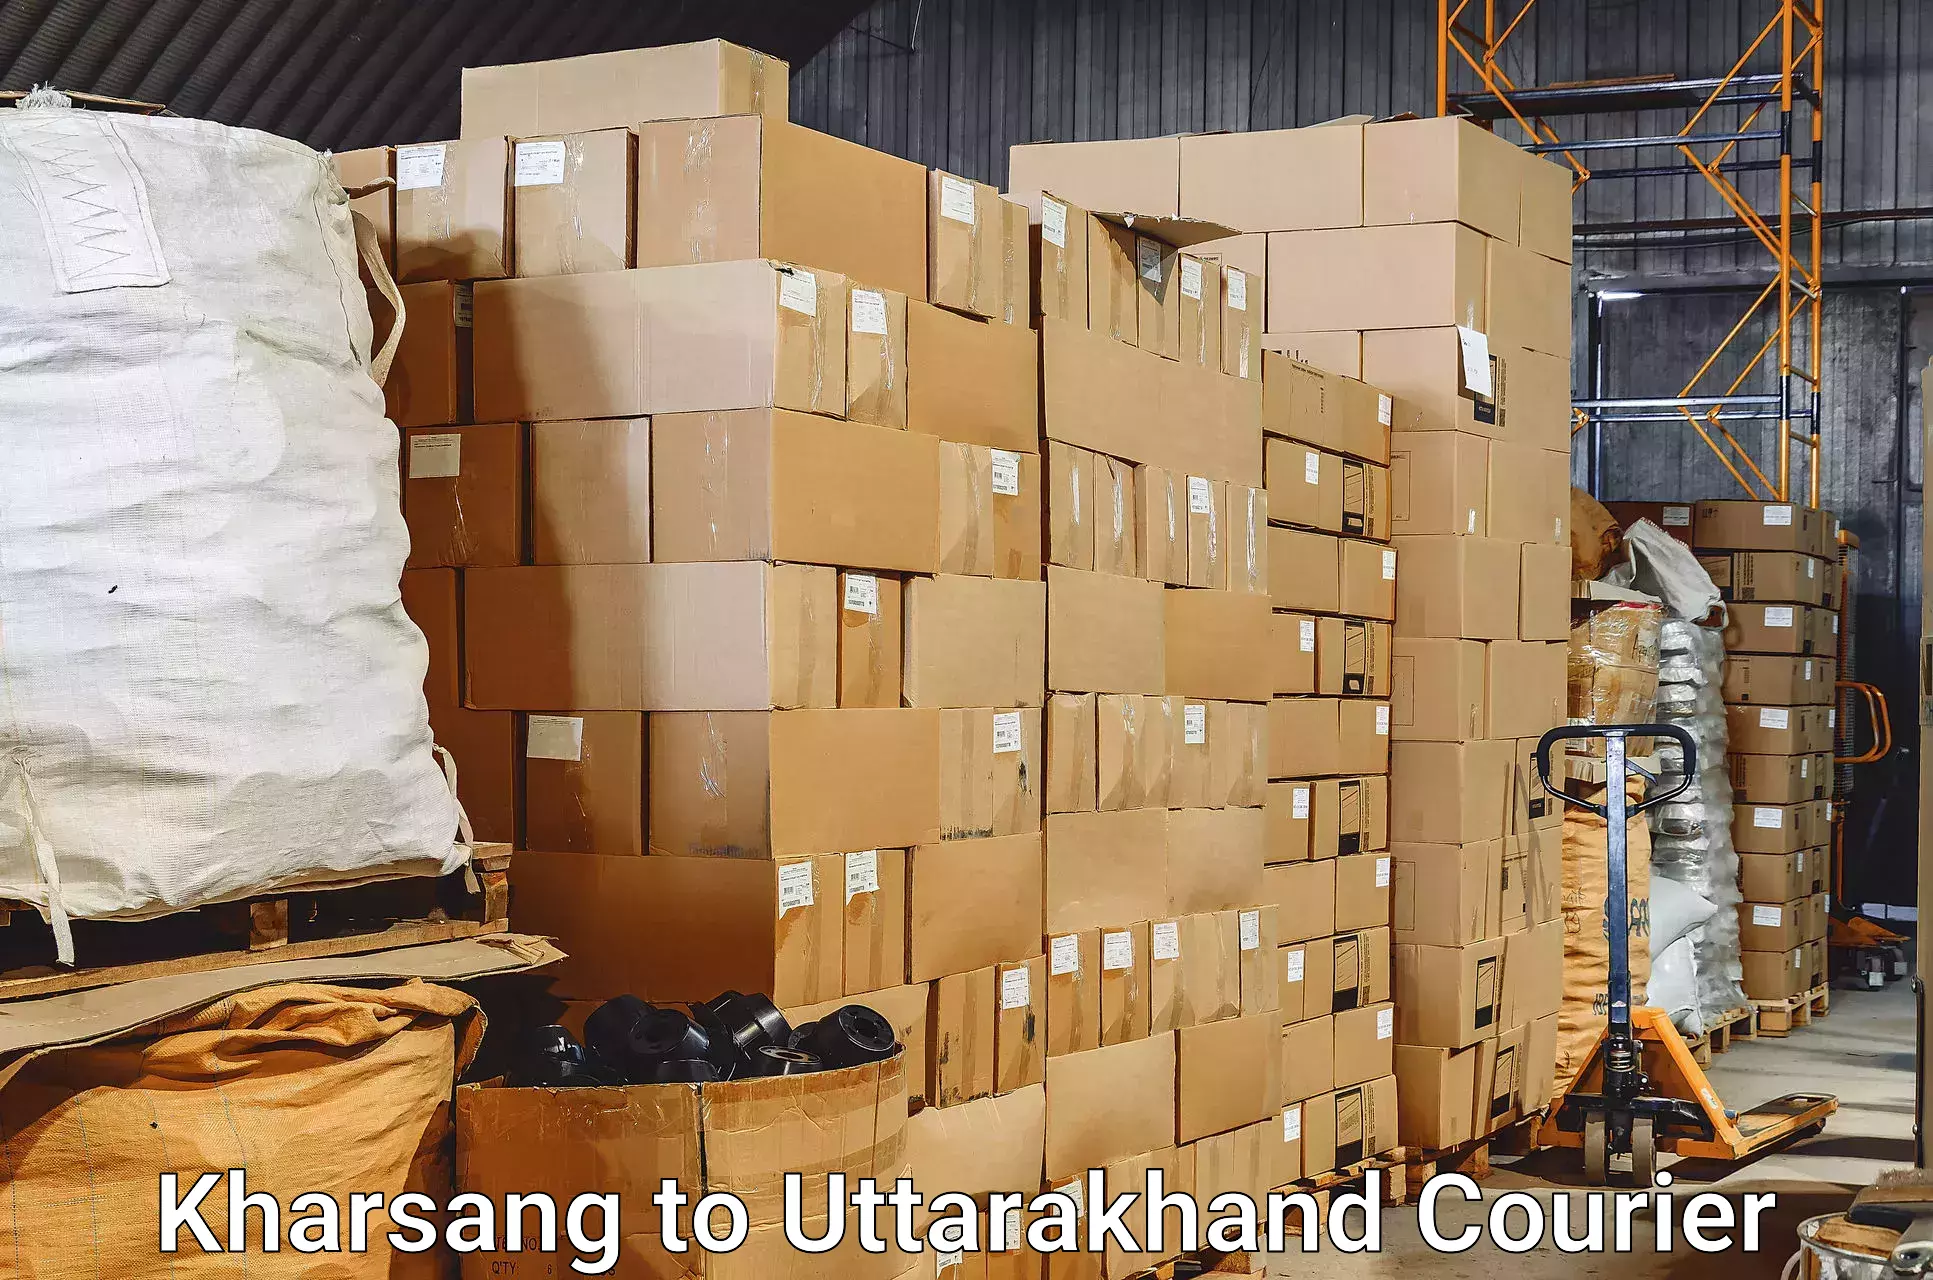 Baggage transport professionals Kharsang to IIT Roorkee